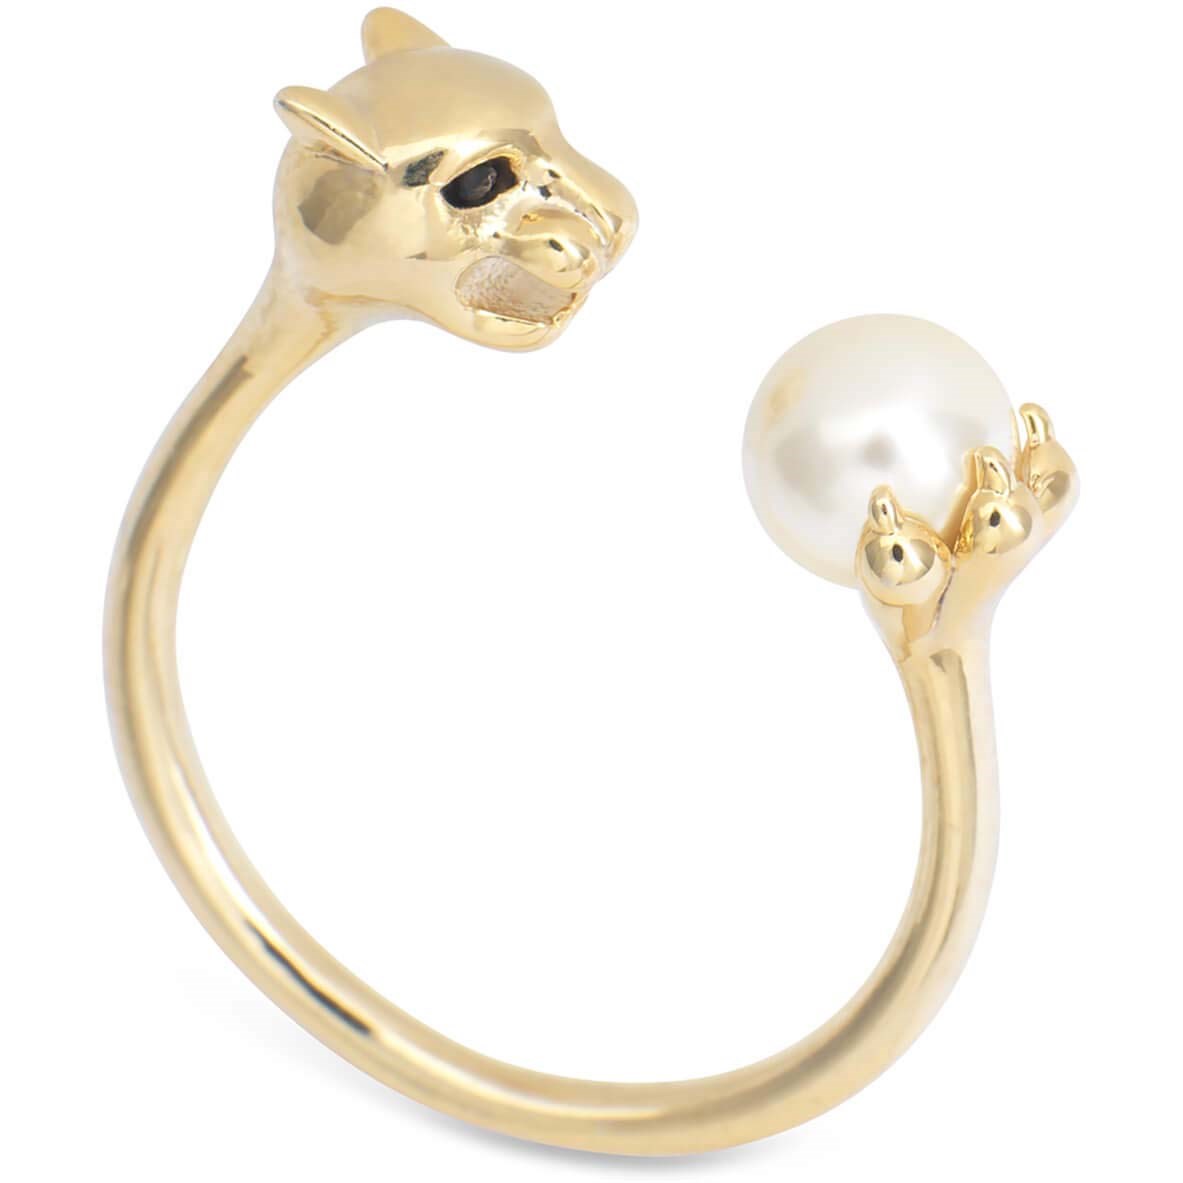 Lily and Rose Queen sheba ring - Gold